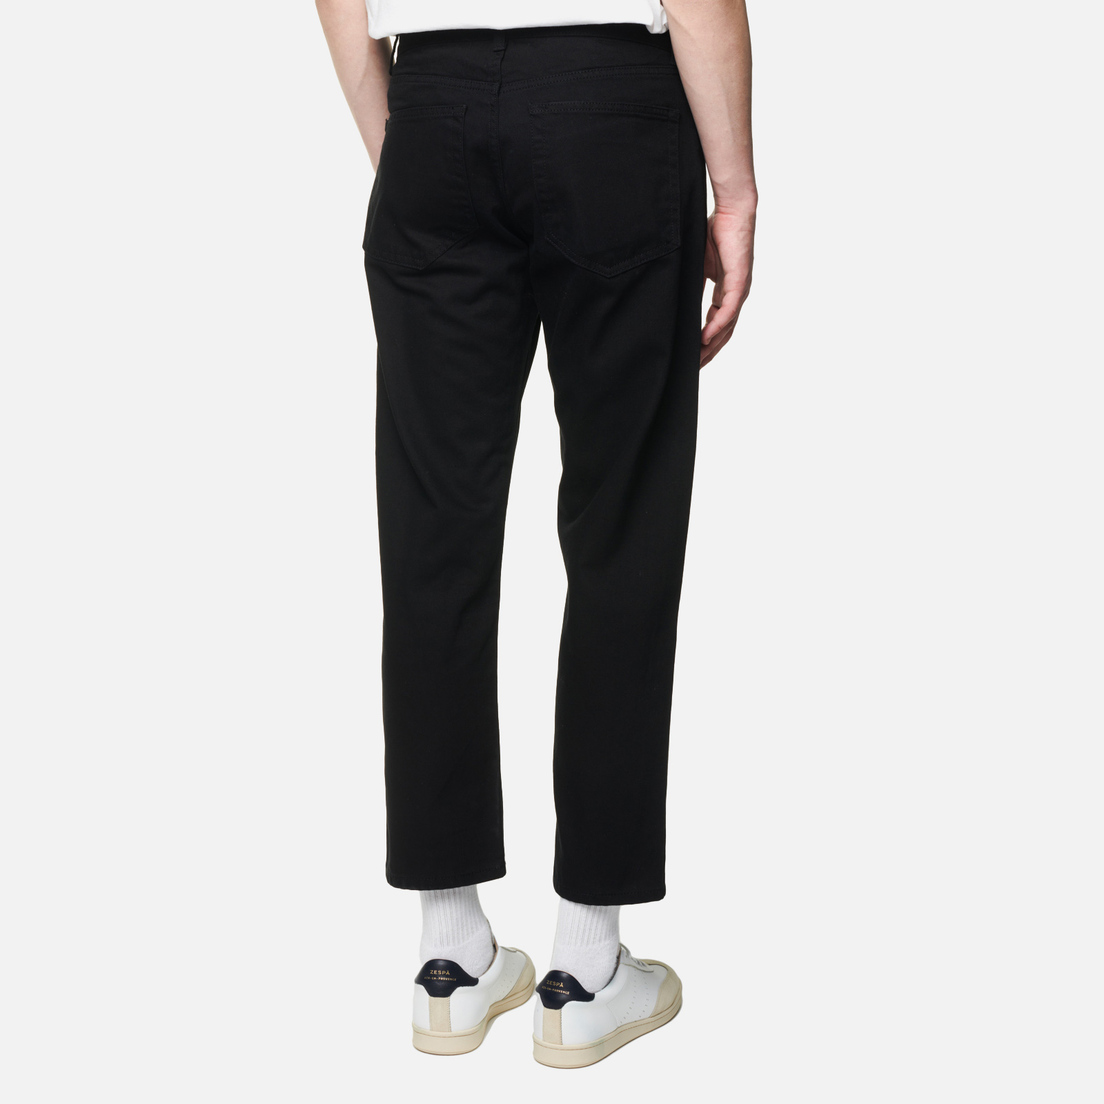 FrizmWORKS Мужские брюки OG Tapered Ankle Cotton